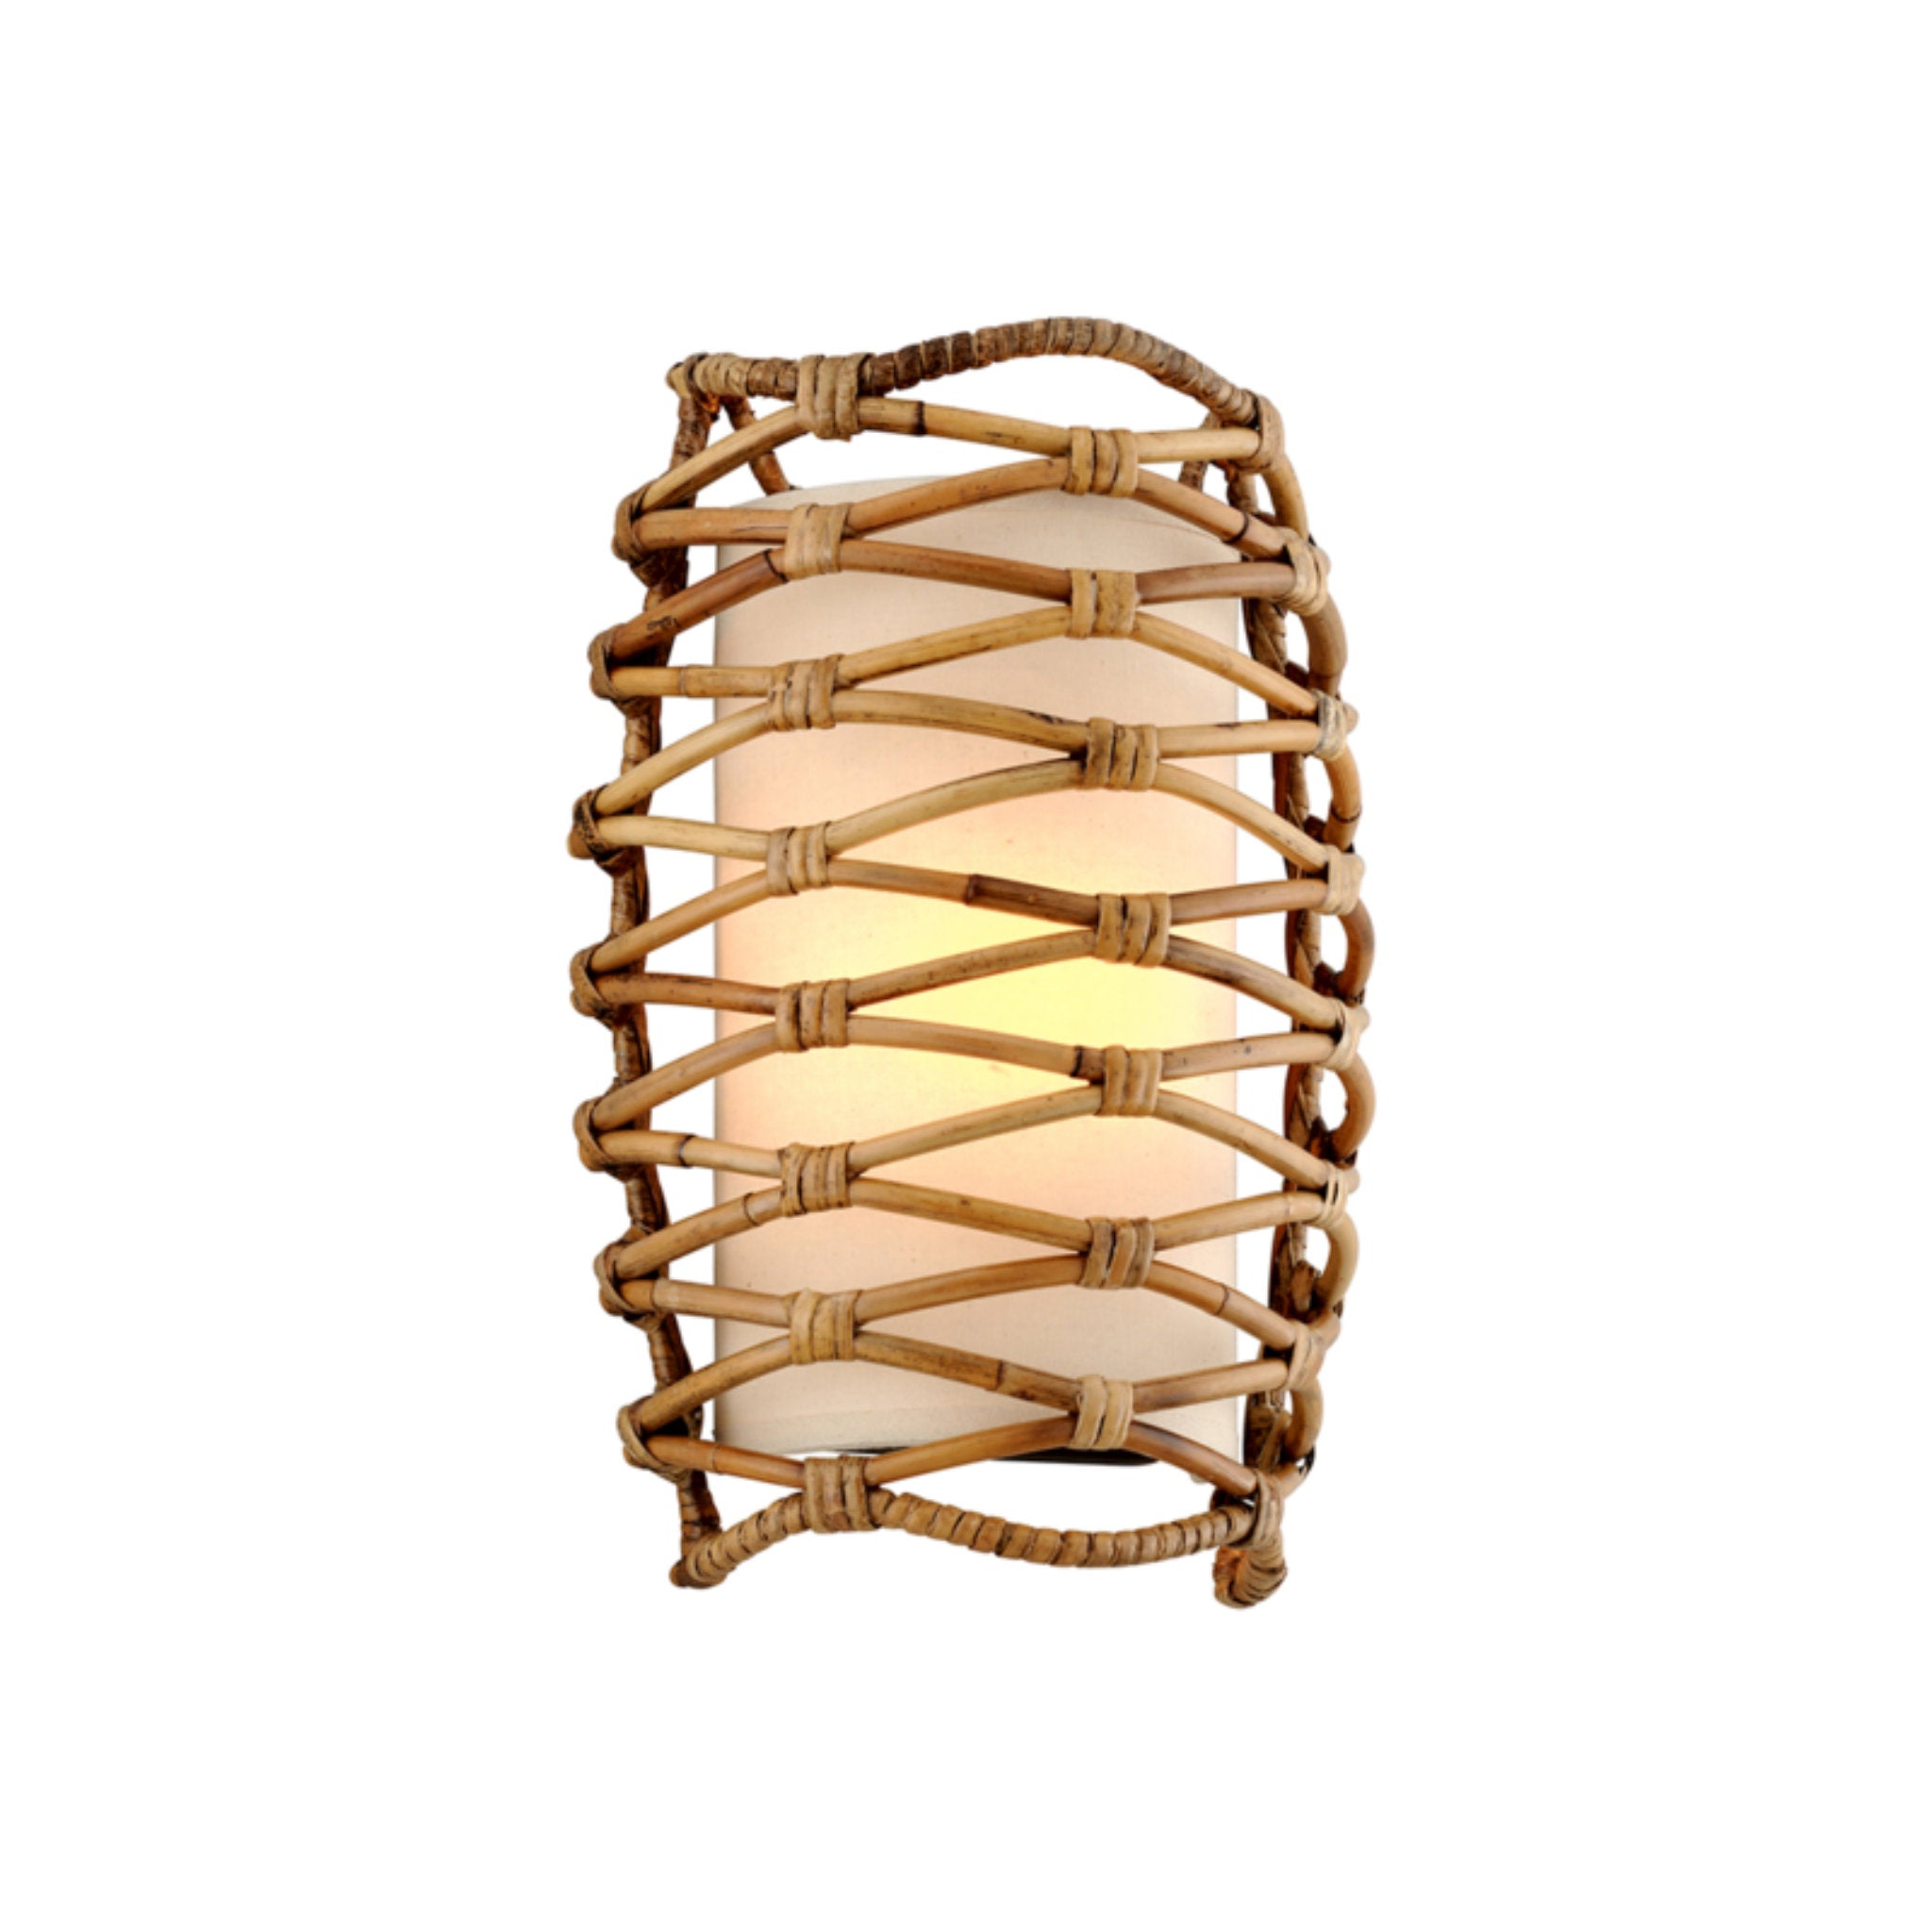 Balboa 1 Light Wall Sconce in Textured Bronze